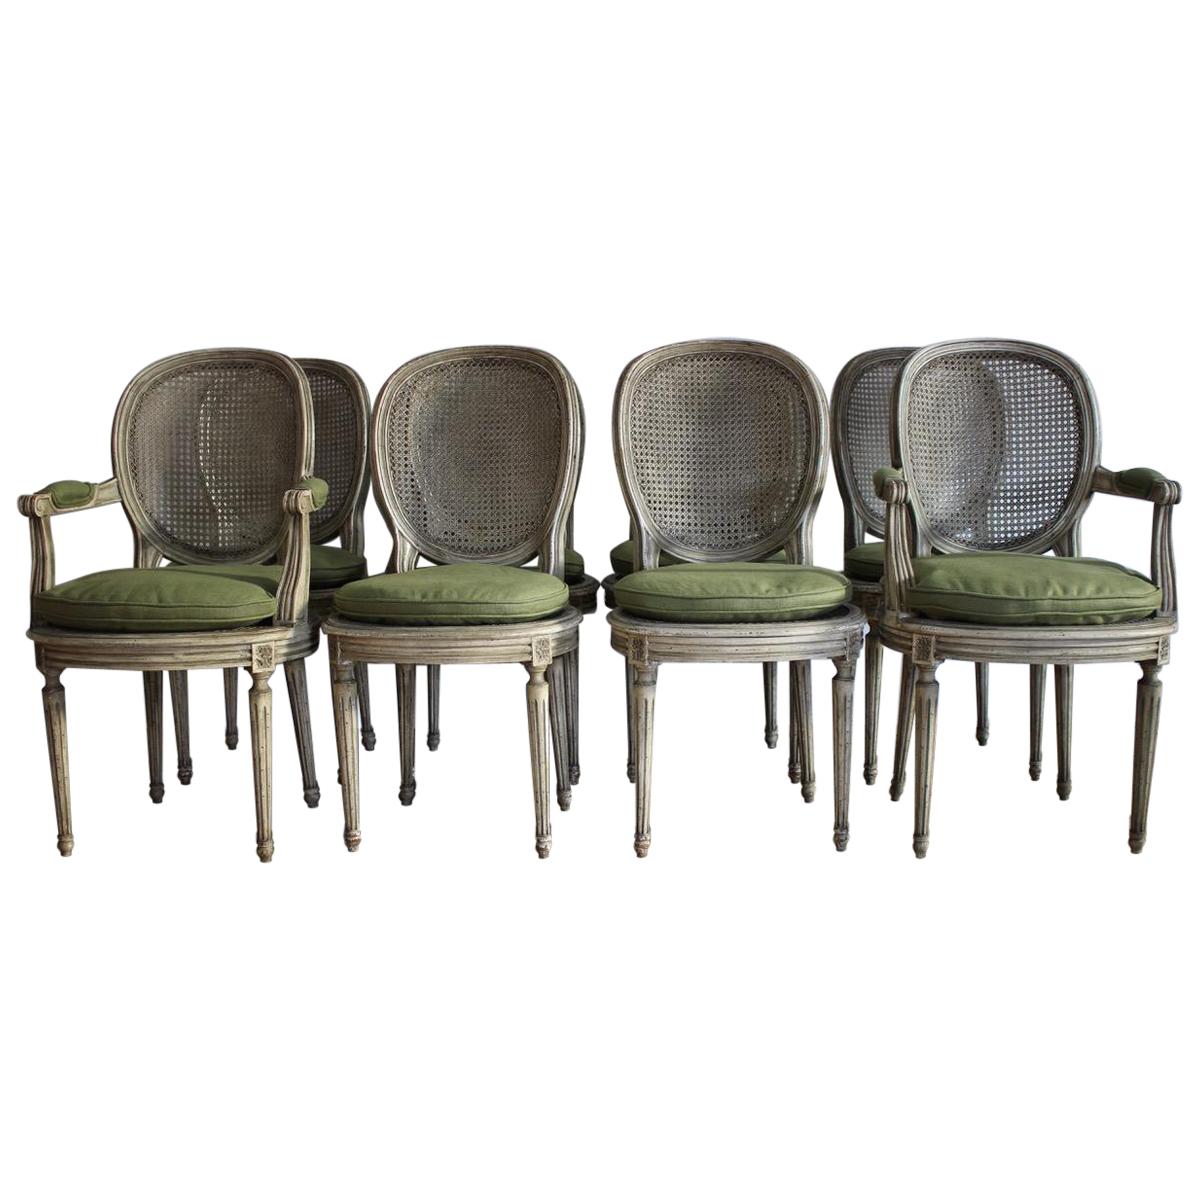 Set of 8, 1930s French Dining Chairs in the Louis XVI Taste